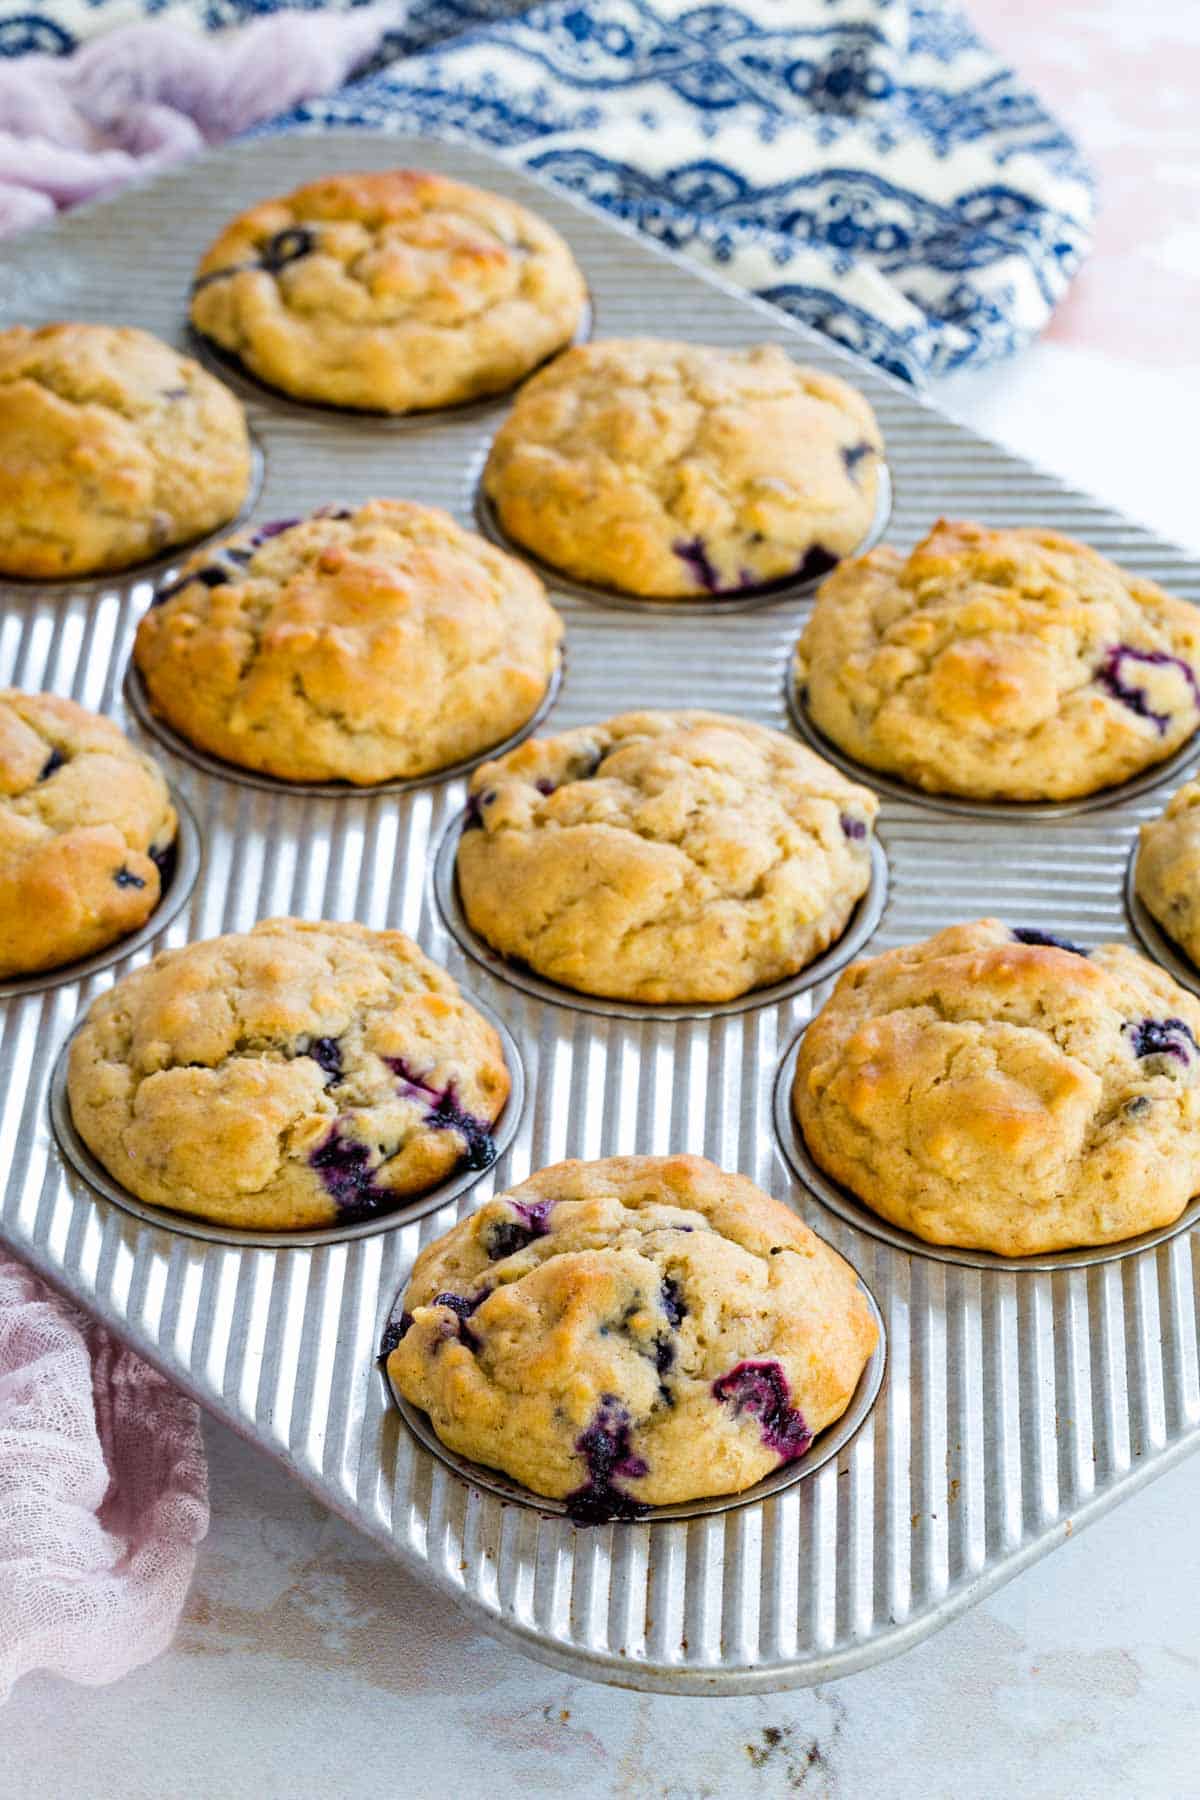 12 banana blueberry muffins inside of a metal muffin tin on a kitchen countertop